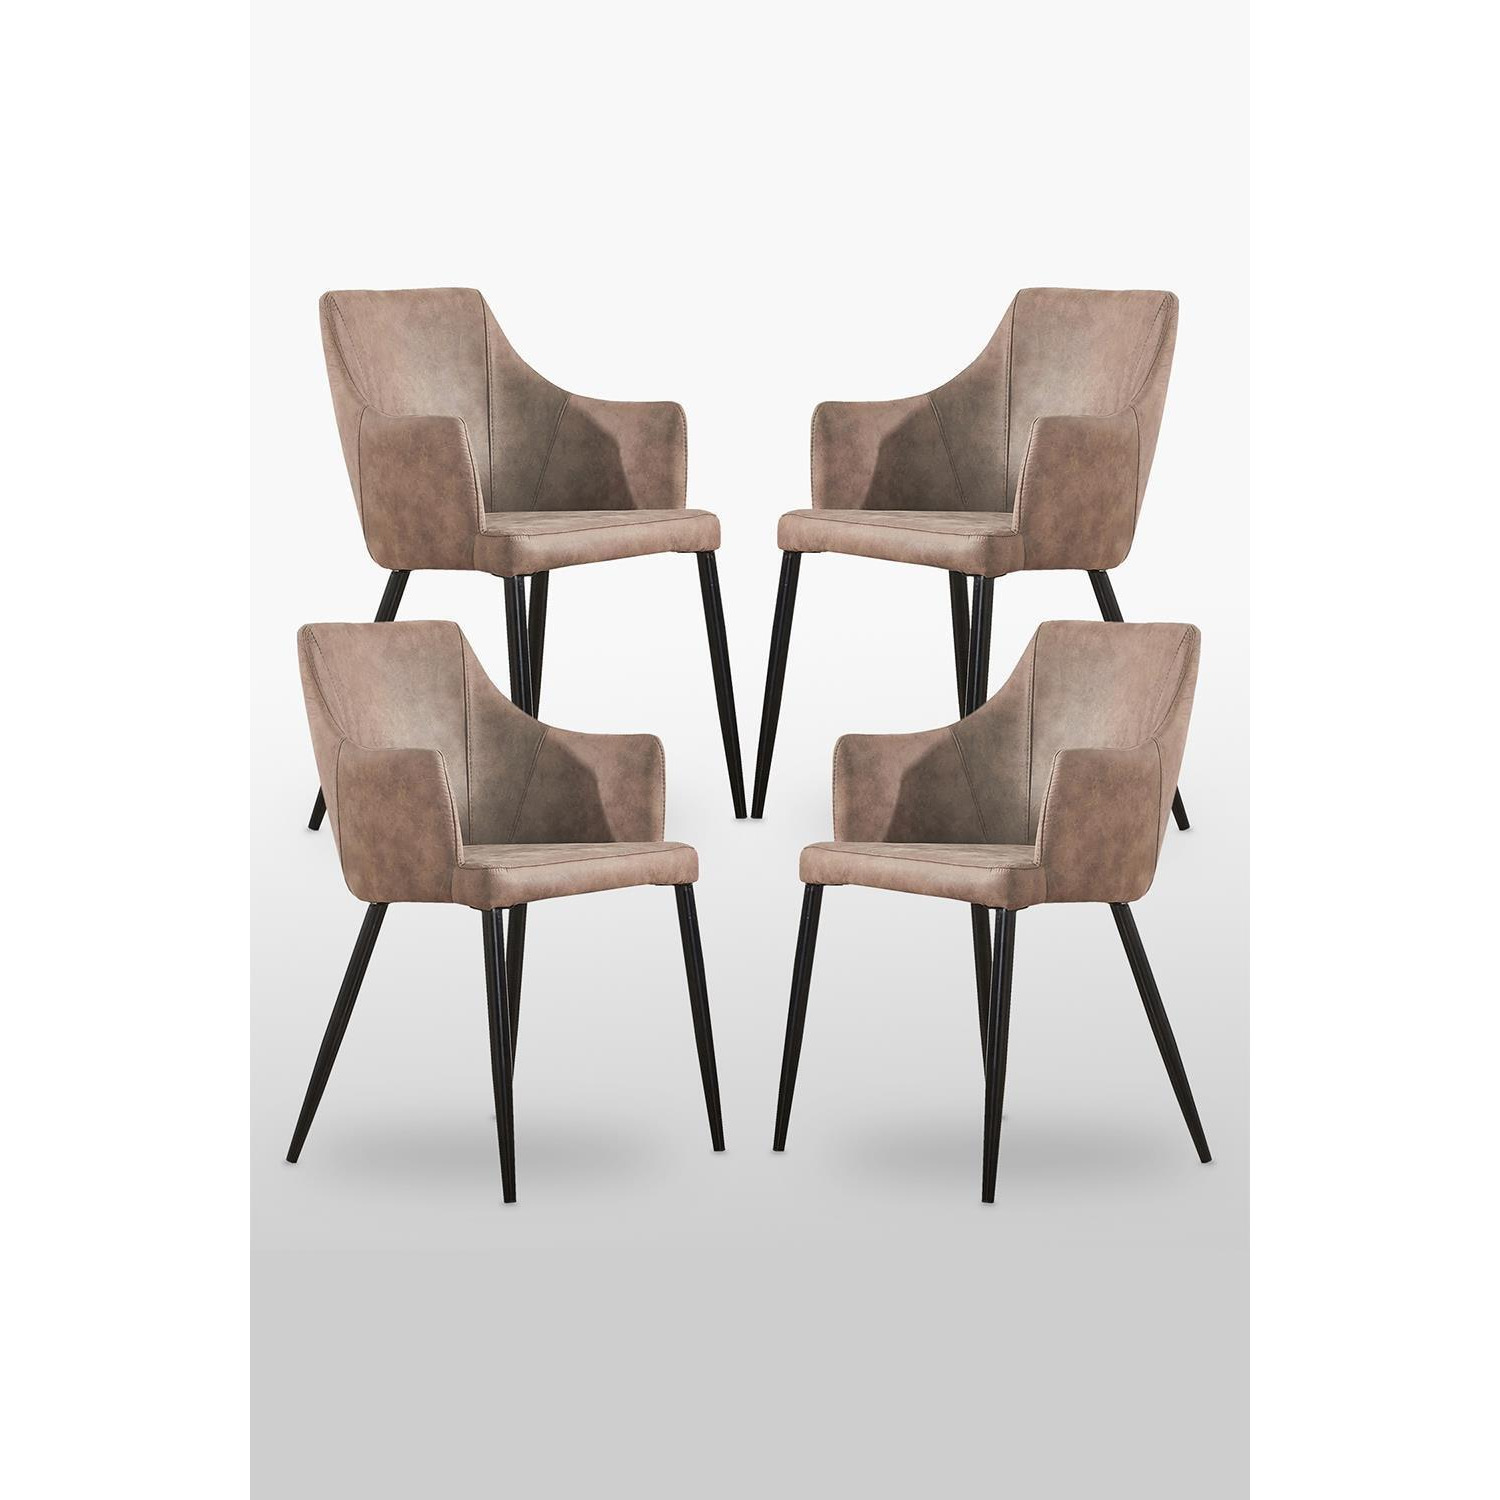 Set of 4 'Zarah Leather Dining Chairs' Upholstered Dining Armchair - image 1